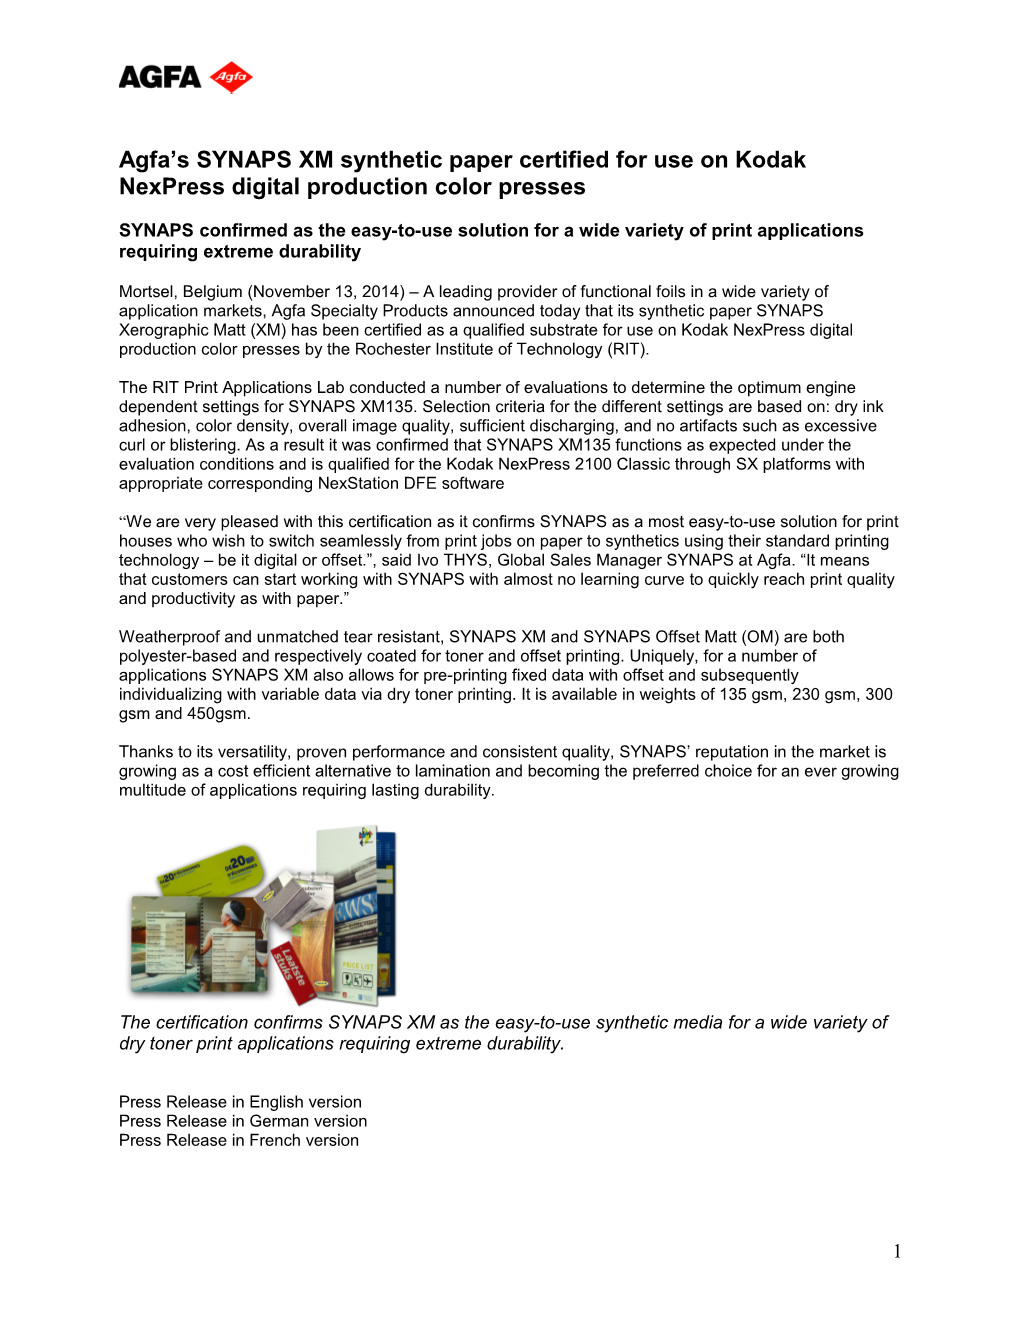 Agfa S SYNAPS XM Synthetic Paper Certified for Use on Kodak Nexpress Digital Production